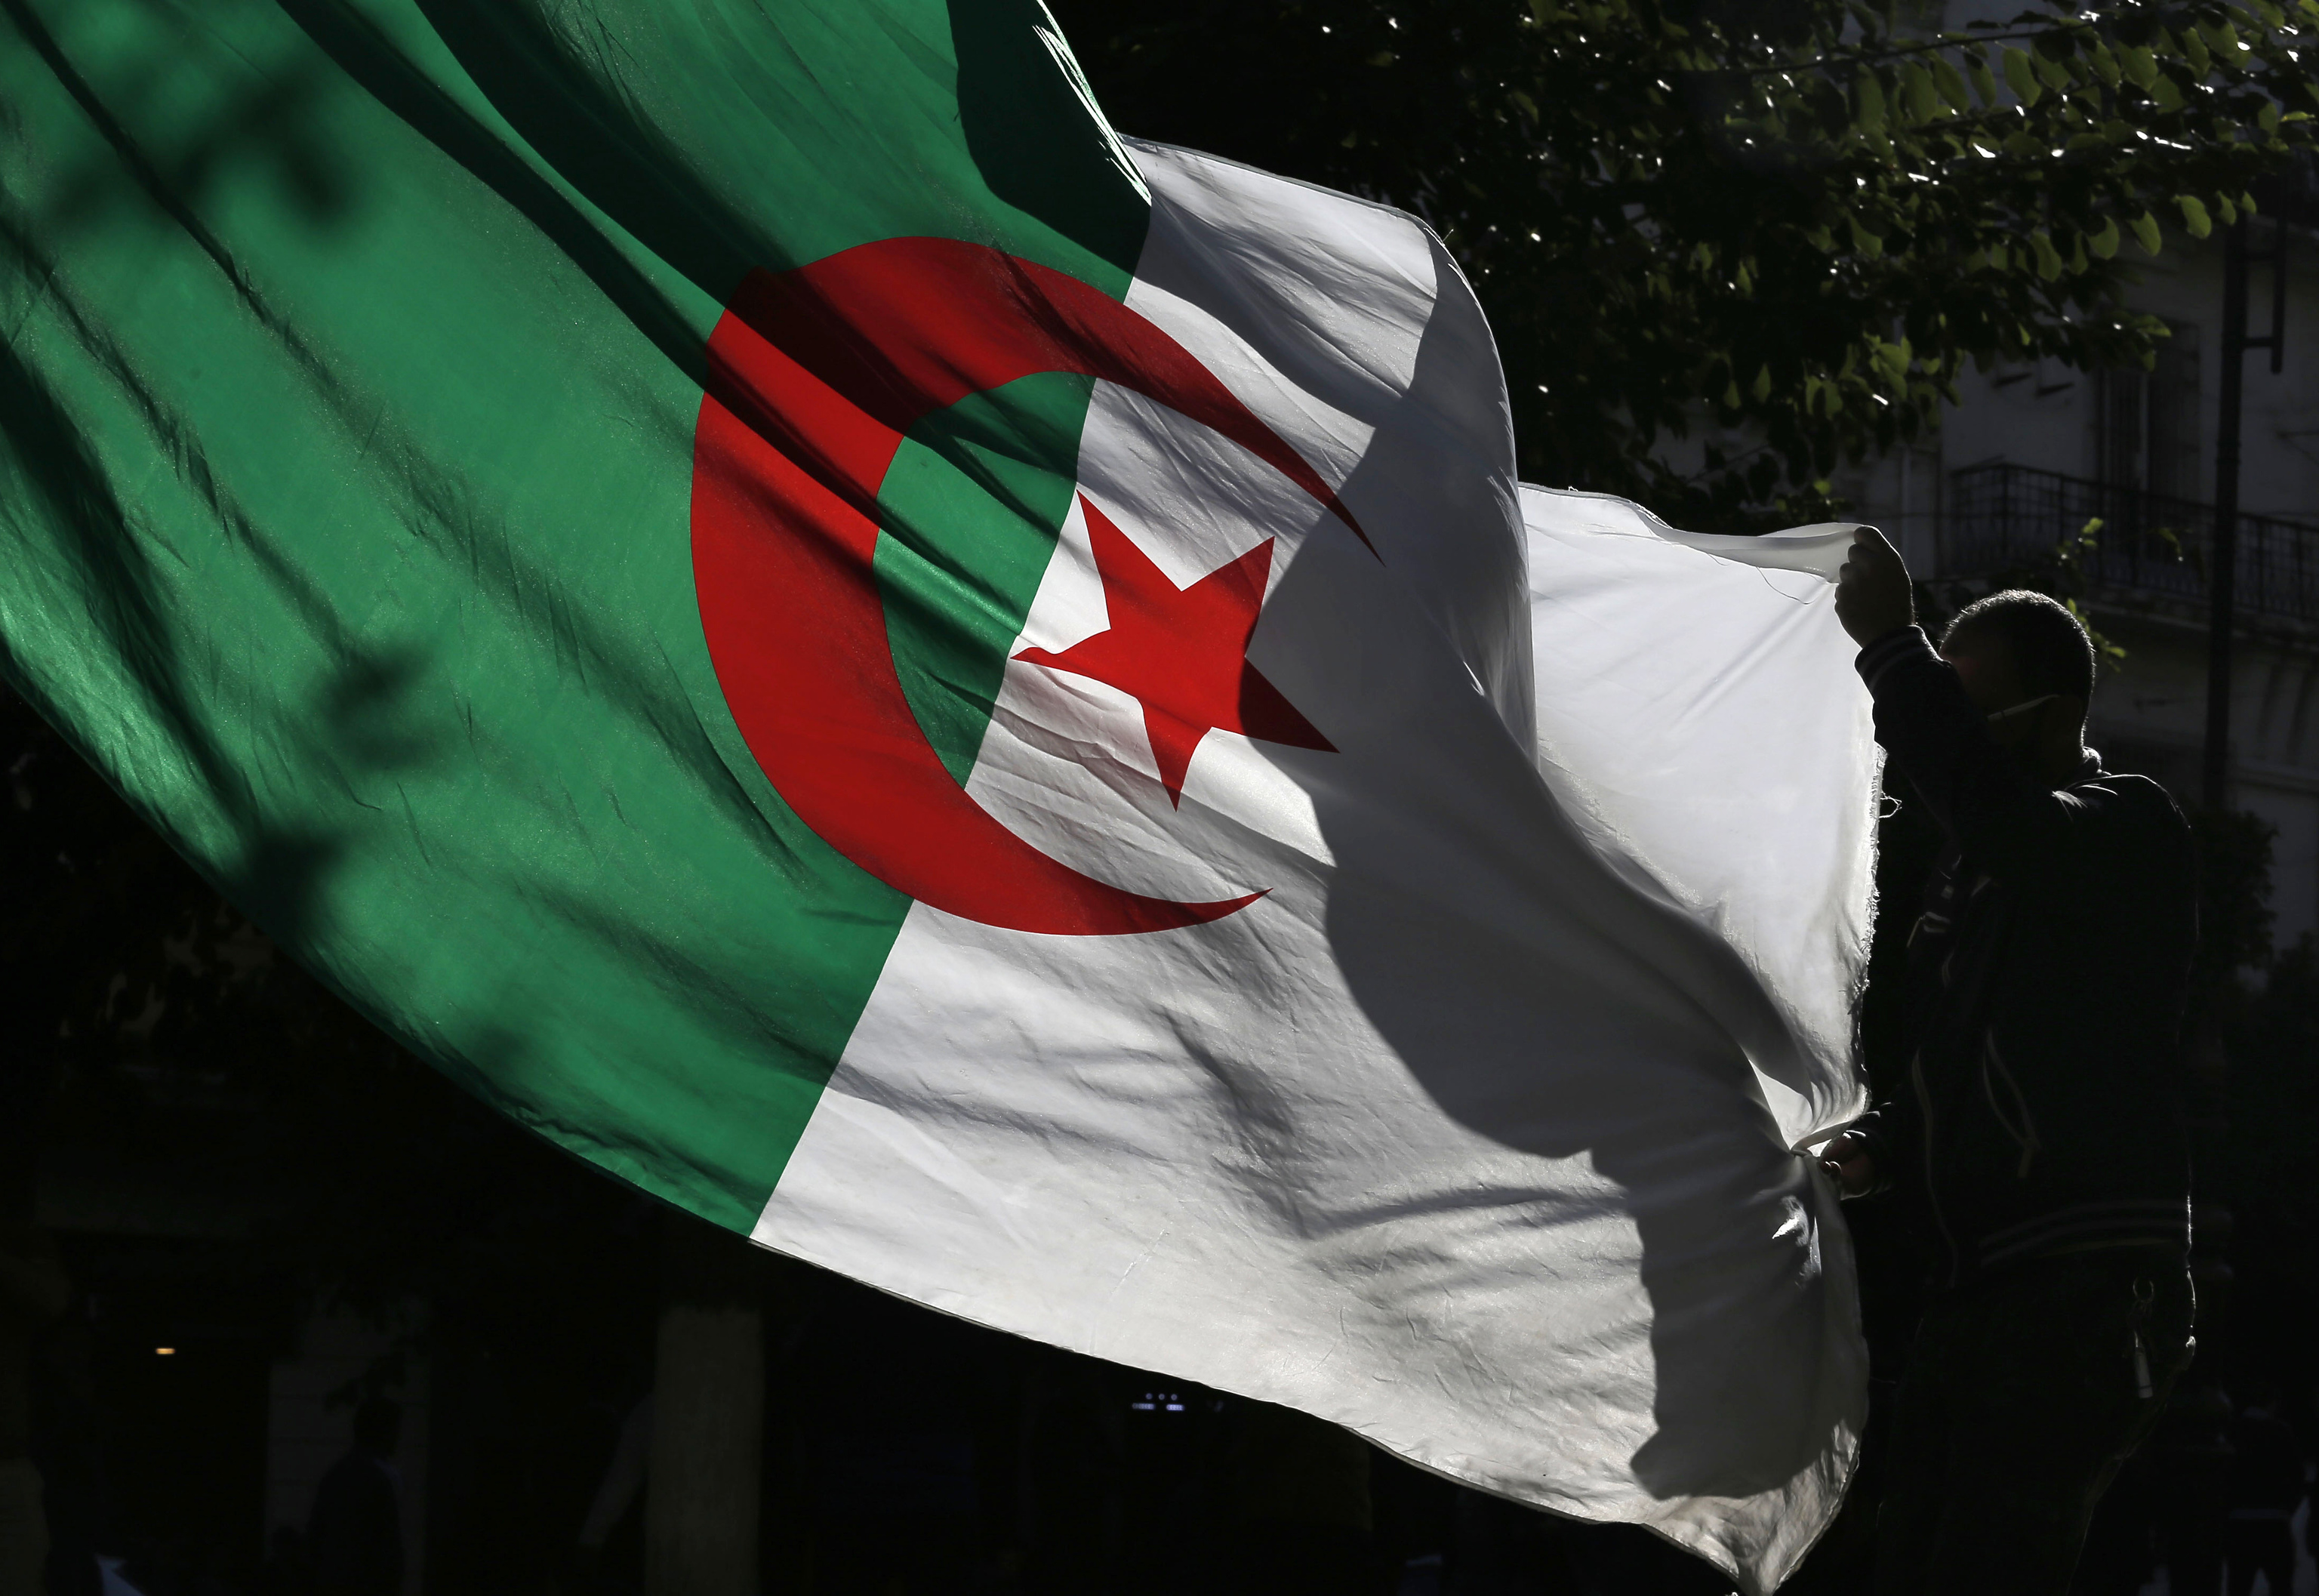 A demonstrator waving the Algerian flag during a protest against the government of this country